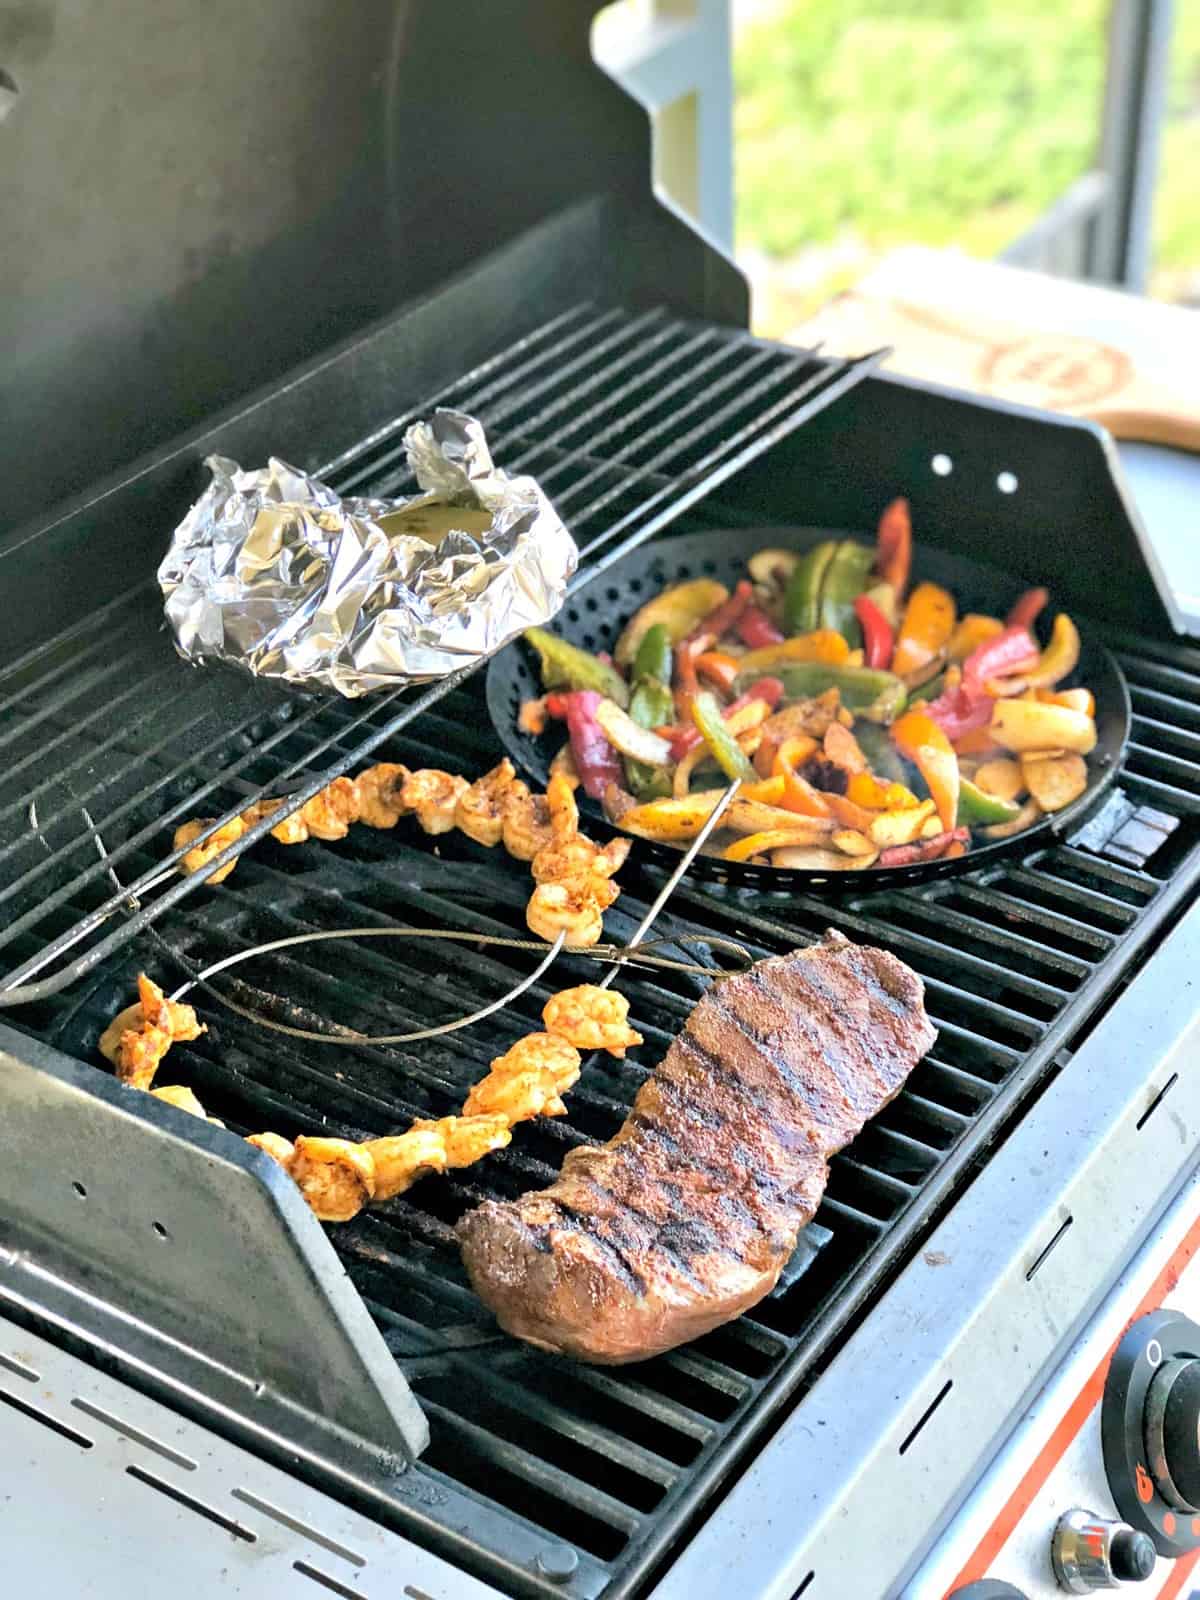 skirt steak, shrimp, and bell peppers cooking on the grill.